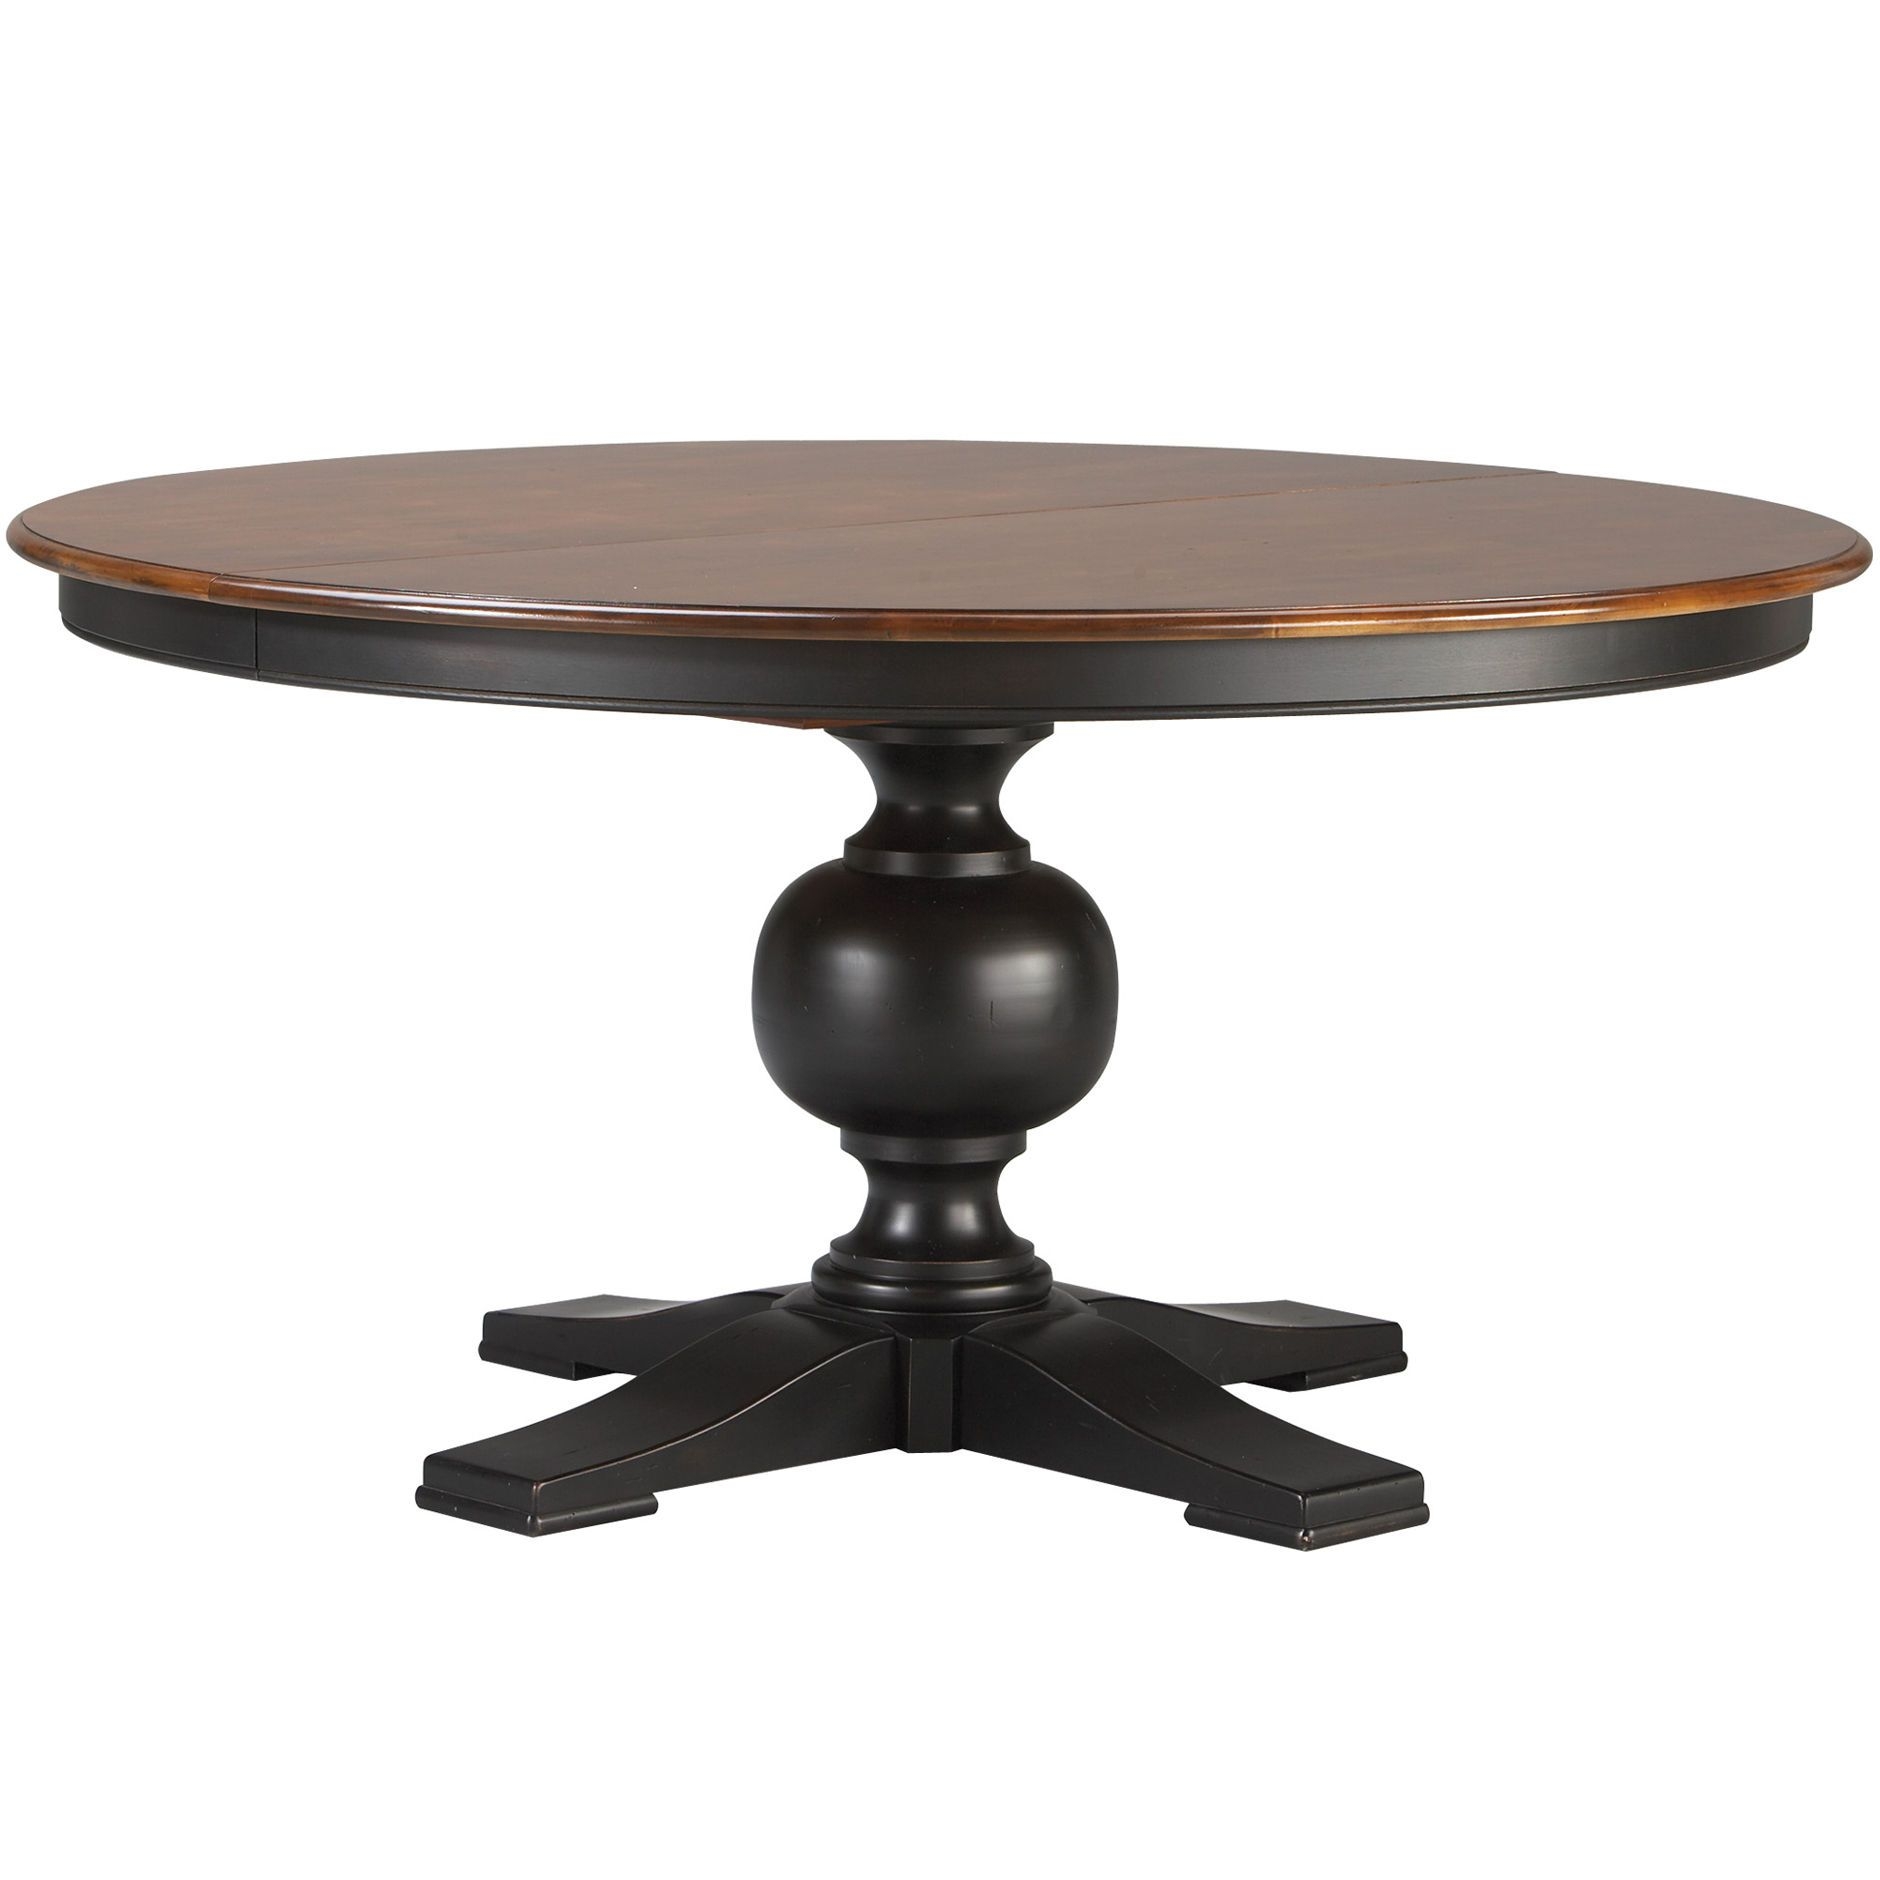 Round Dining Table With Leaf Extension - Ideas on Foter